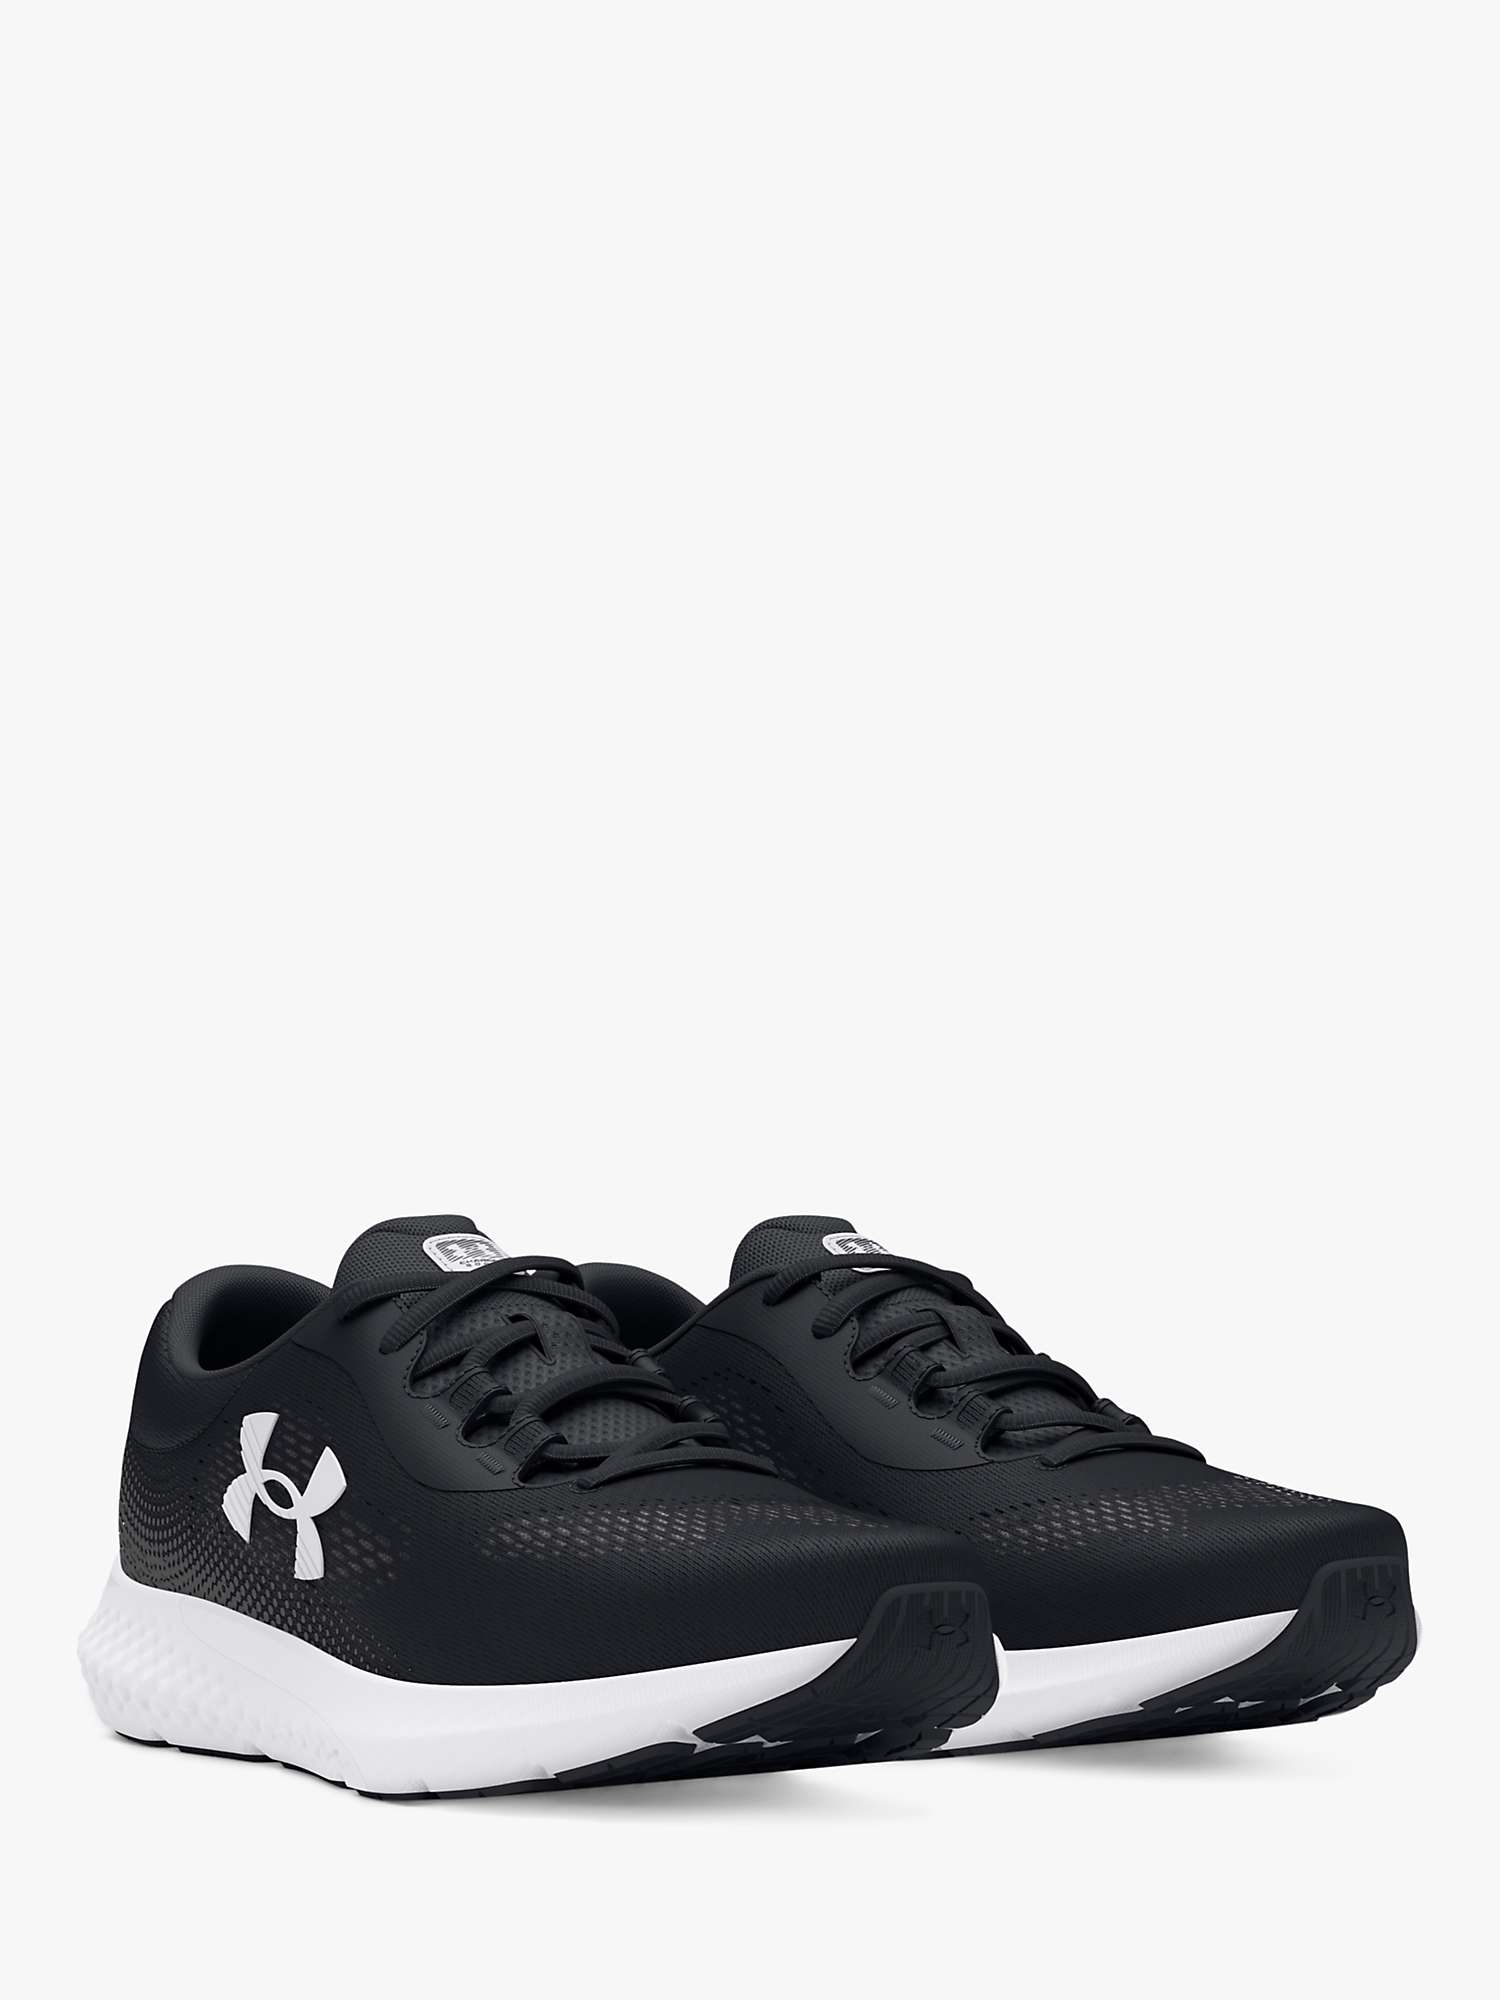 Buy Under Armour Rogue 4 Women's Running Shoes Online at johnlewis.com